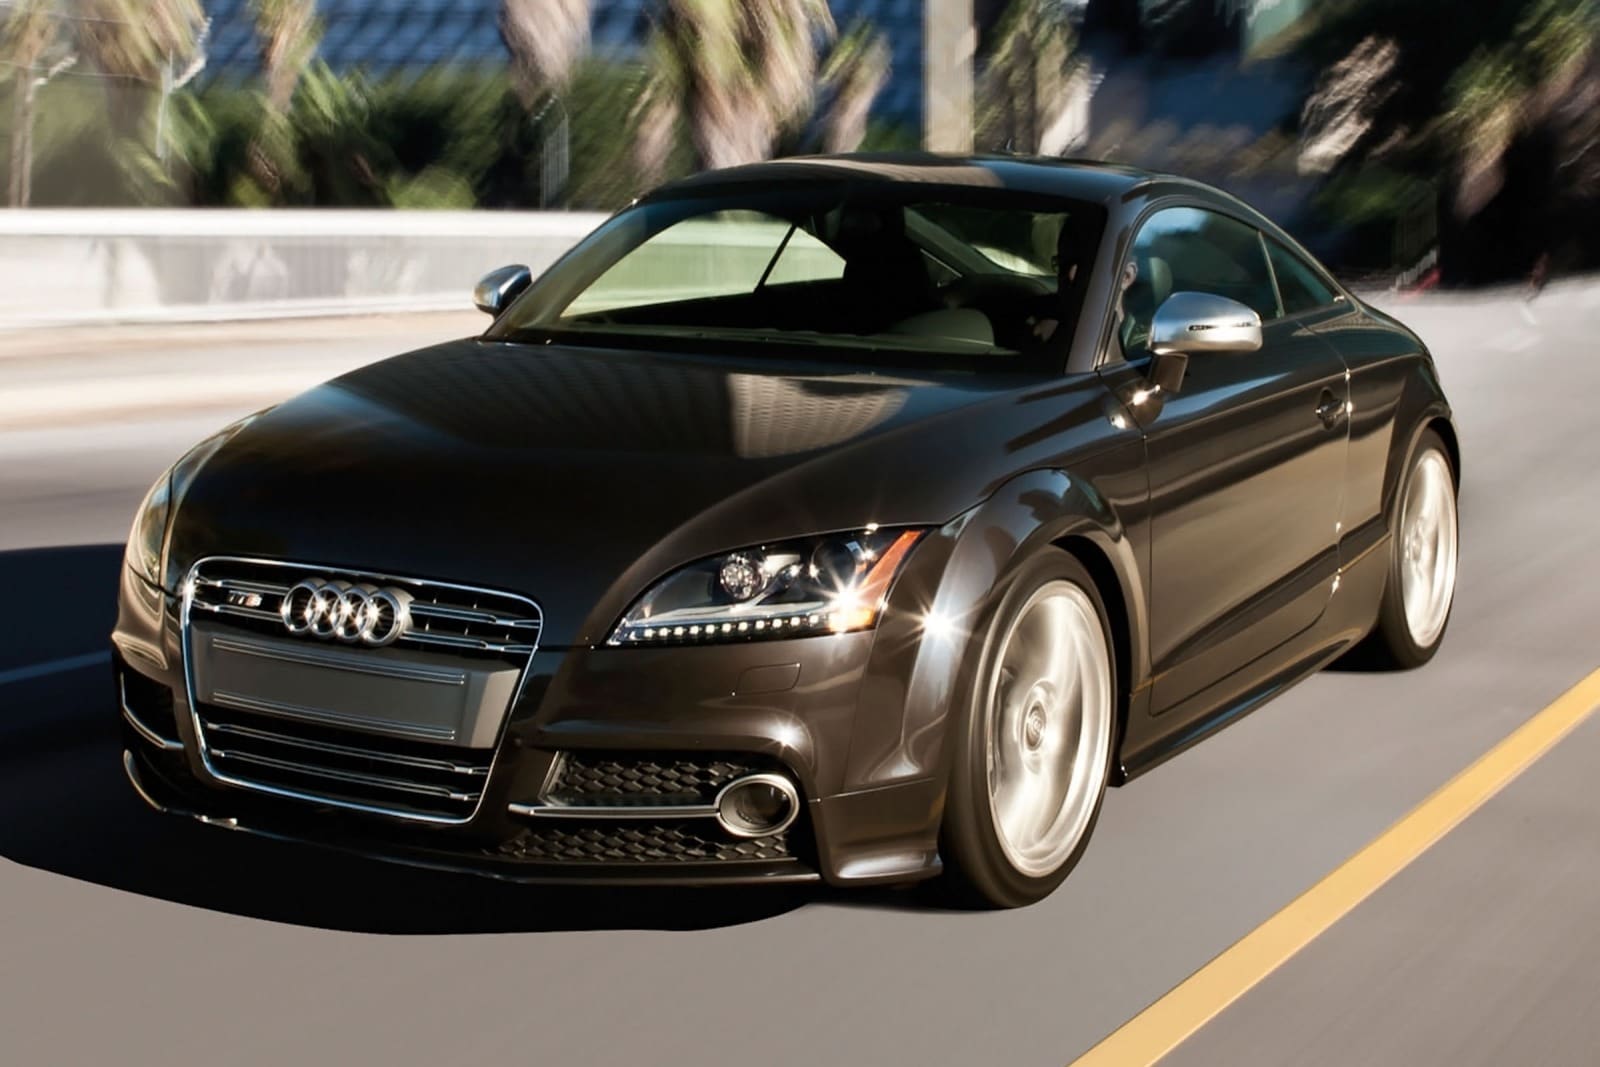 Used 2013 Audi TTS Coupe Review | Edmunds